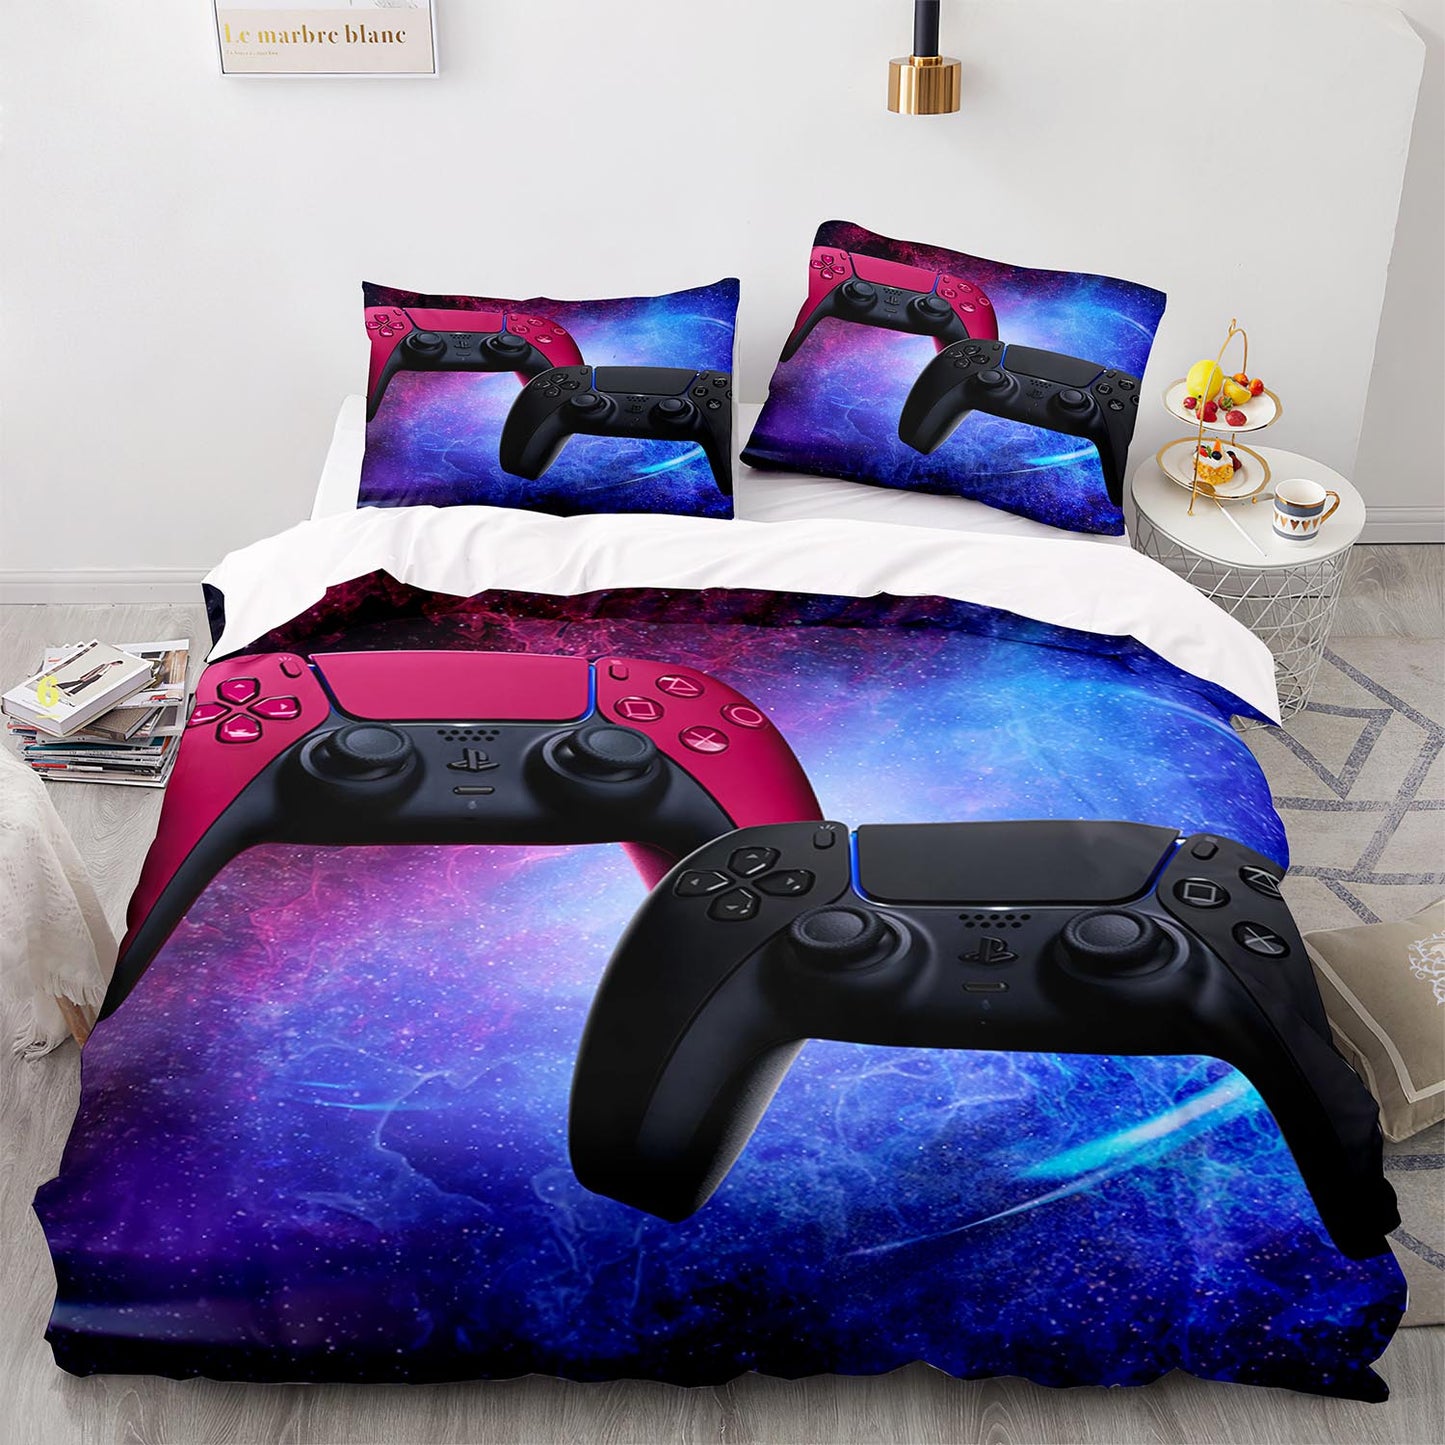 Customize Photo Logo Duvet Cover Boys Girls Adults Gift Custom Made DIY Bedding Set Designer Bed Set Queen Size Quilt Cover PS1070